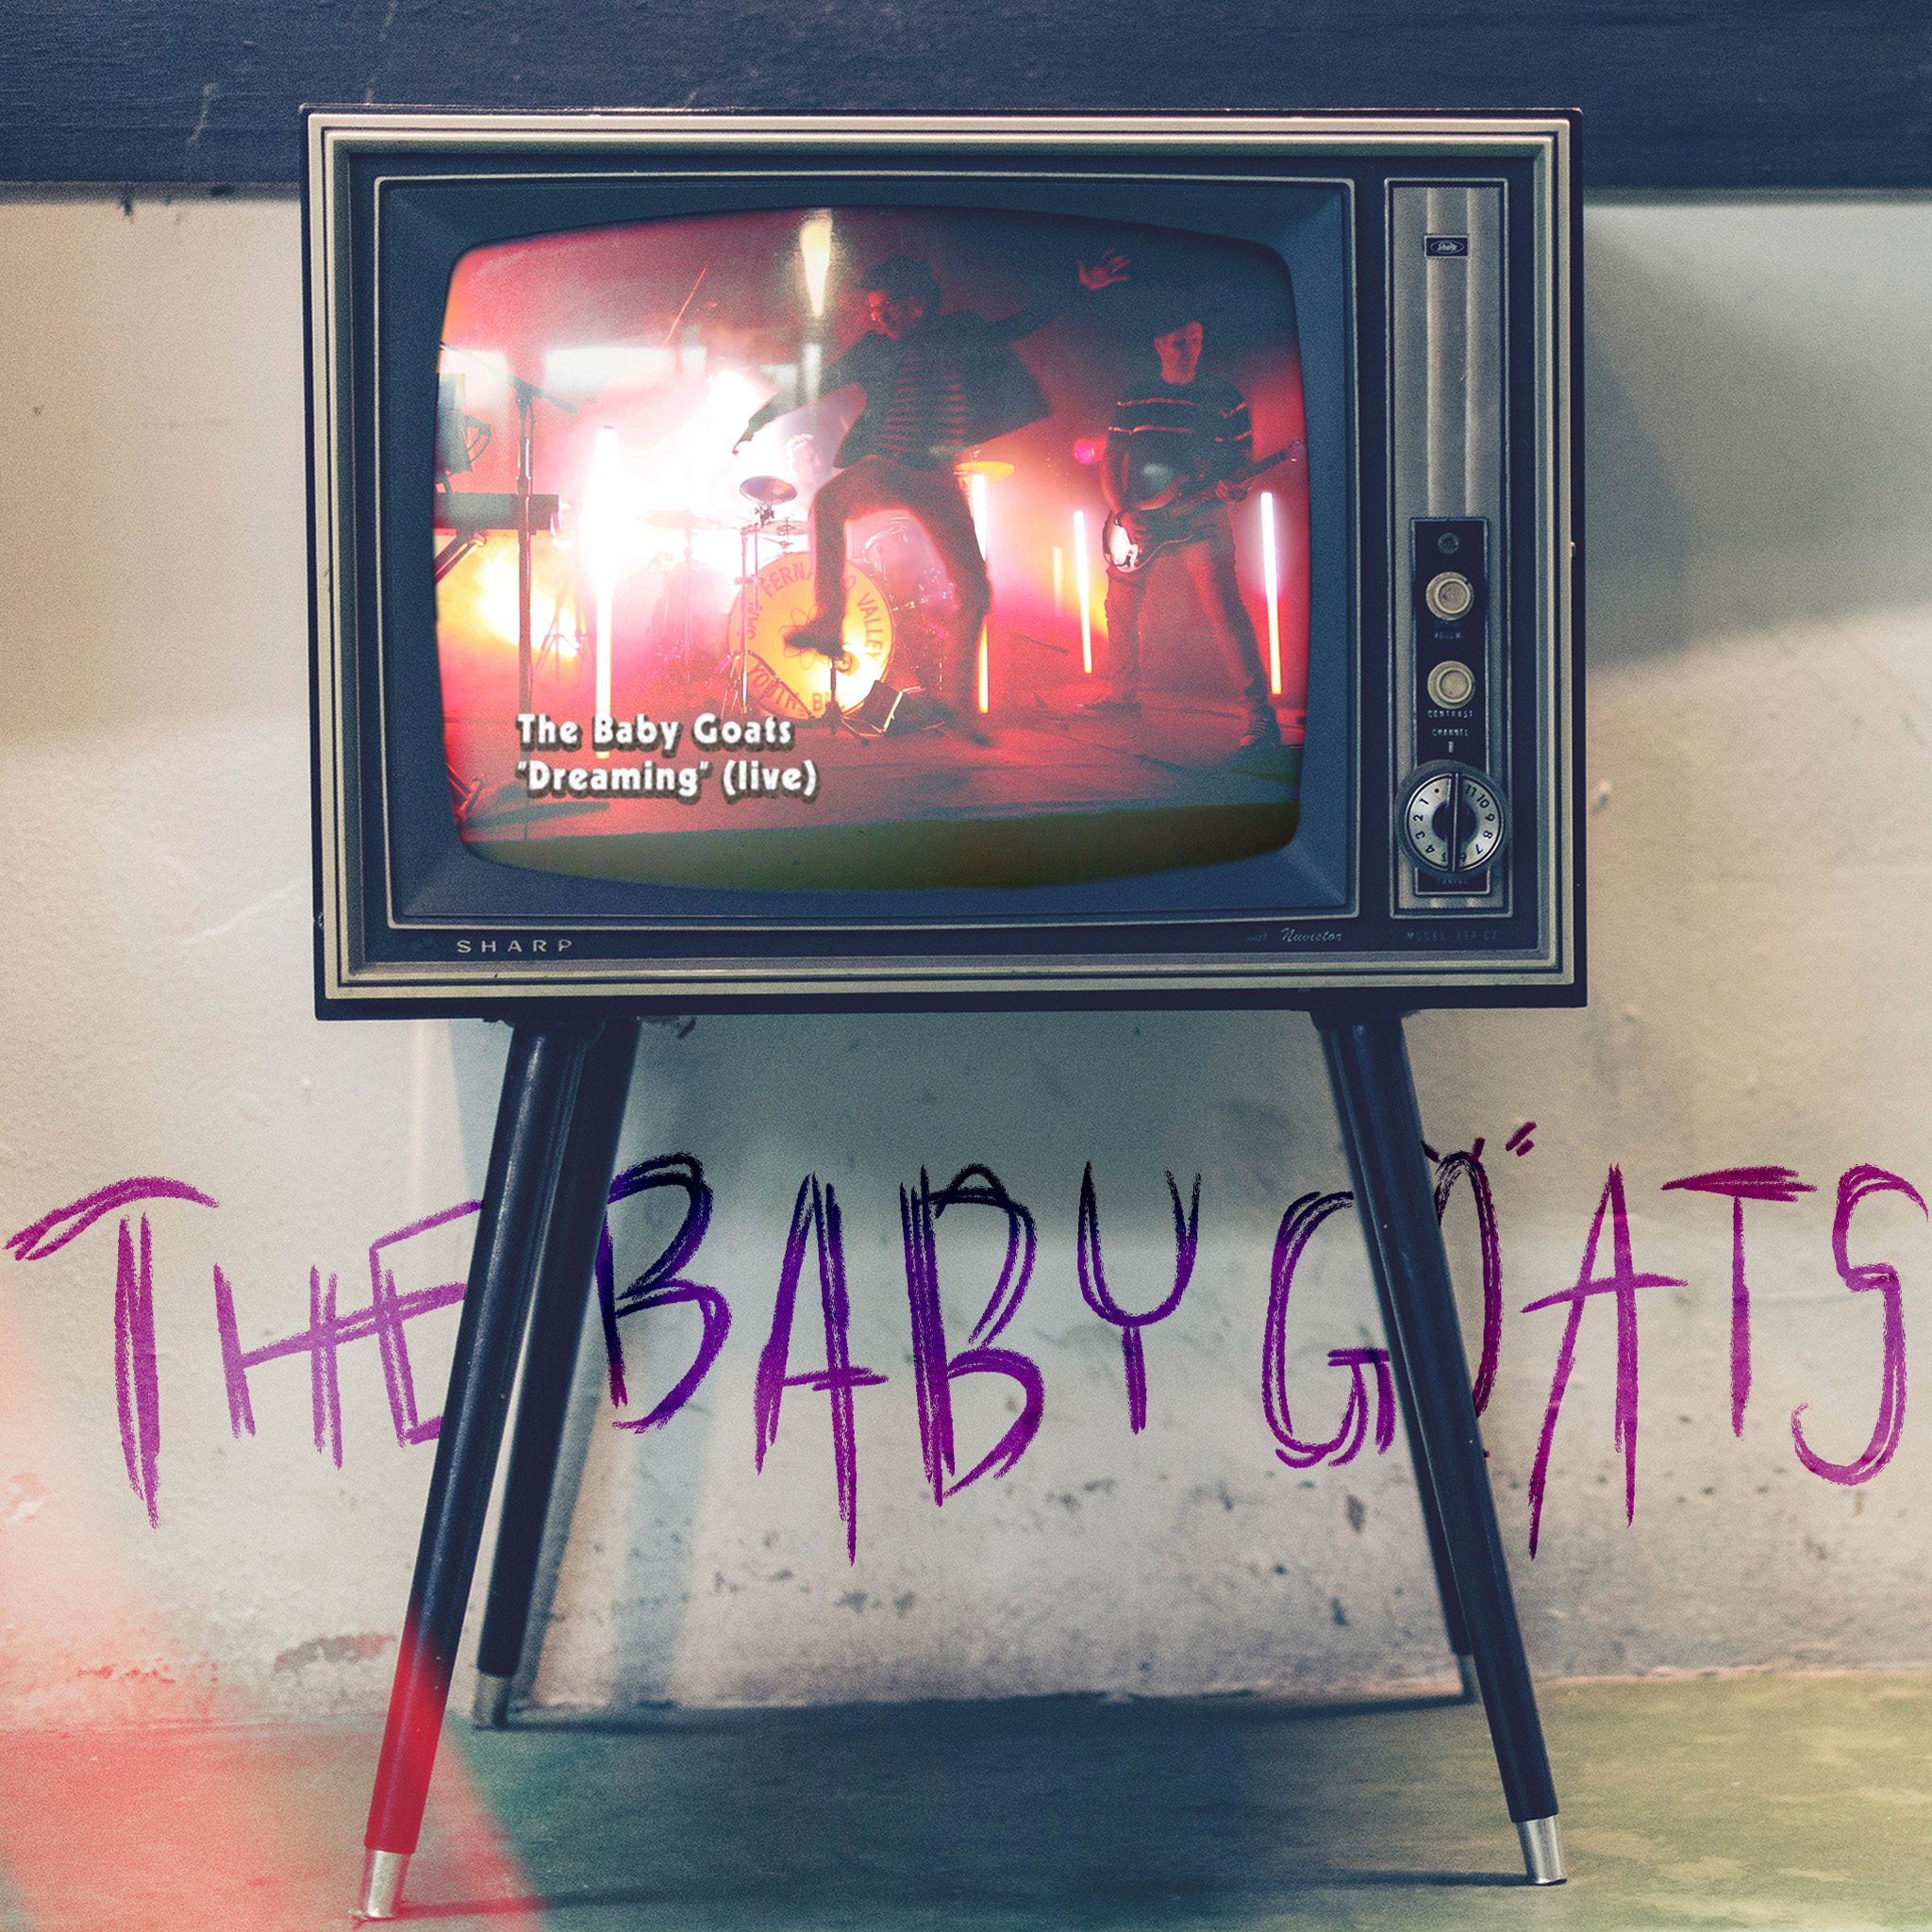 The Baby Goats - Dreaming (live) Single Art